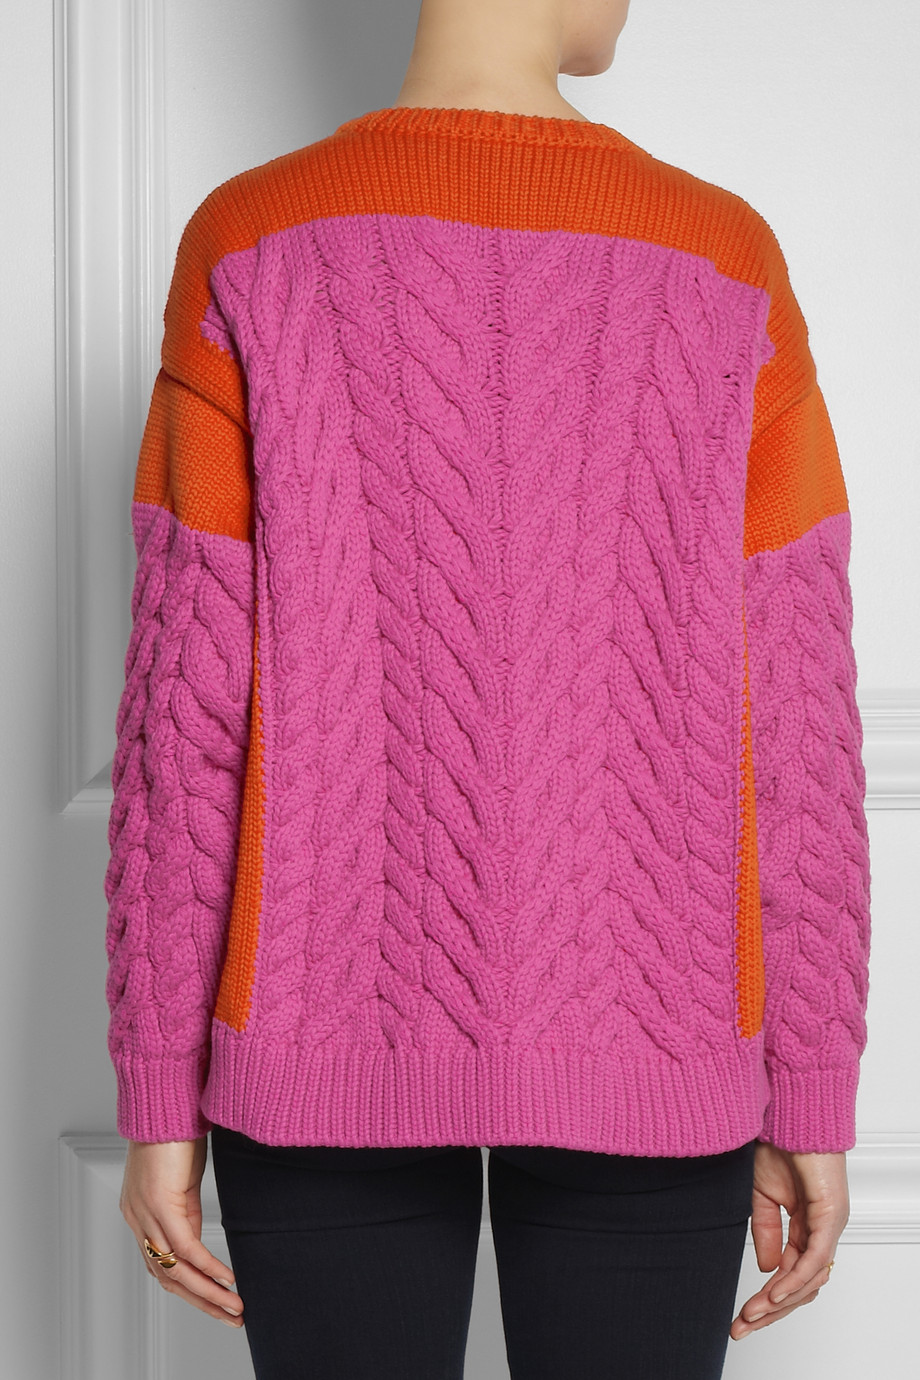 Stella mccartney Chunky Cable-Knit Cotton-Blend Sweater in Pink | Lyst